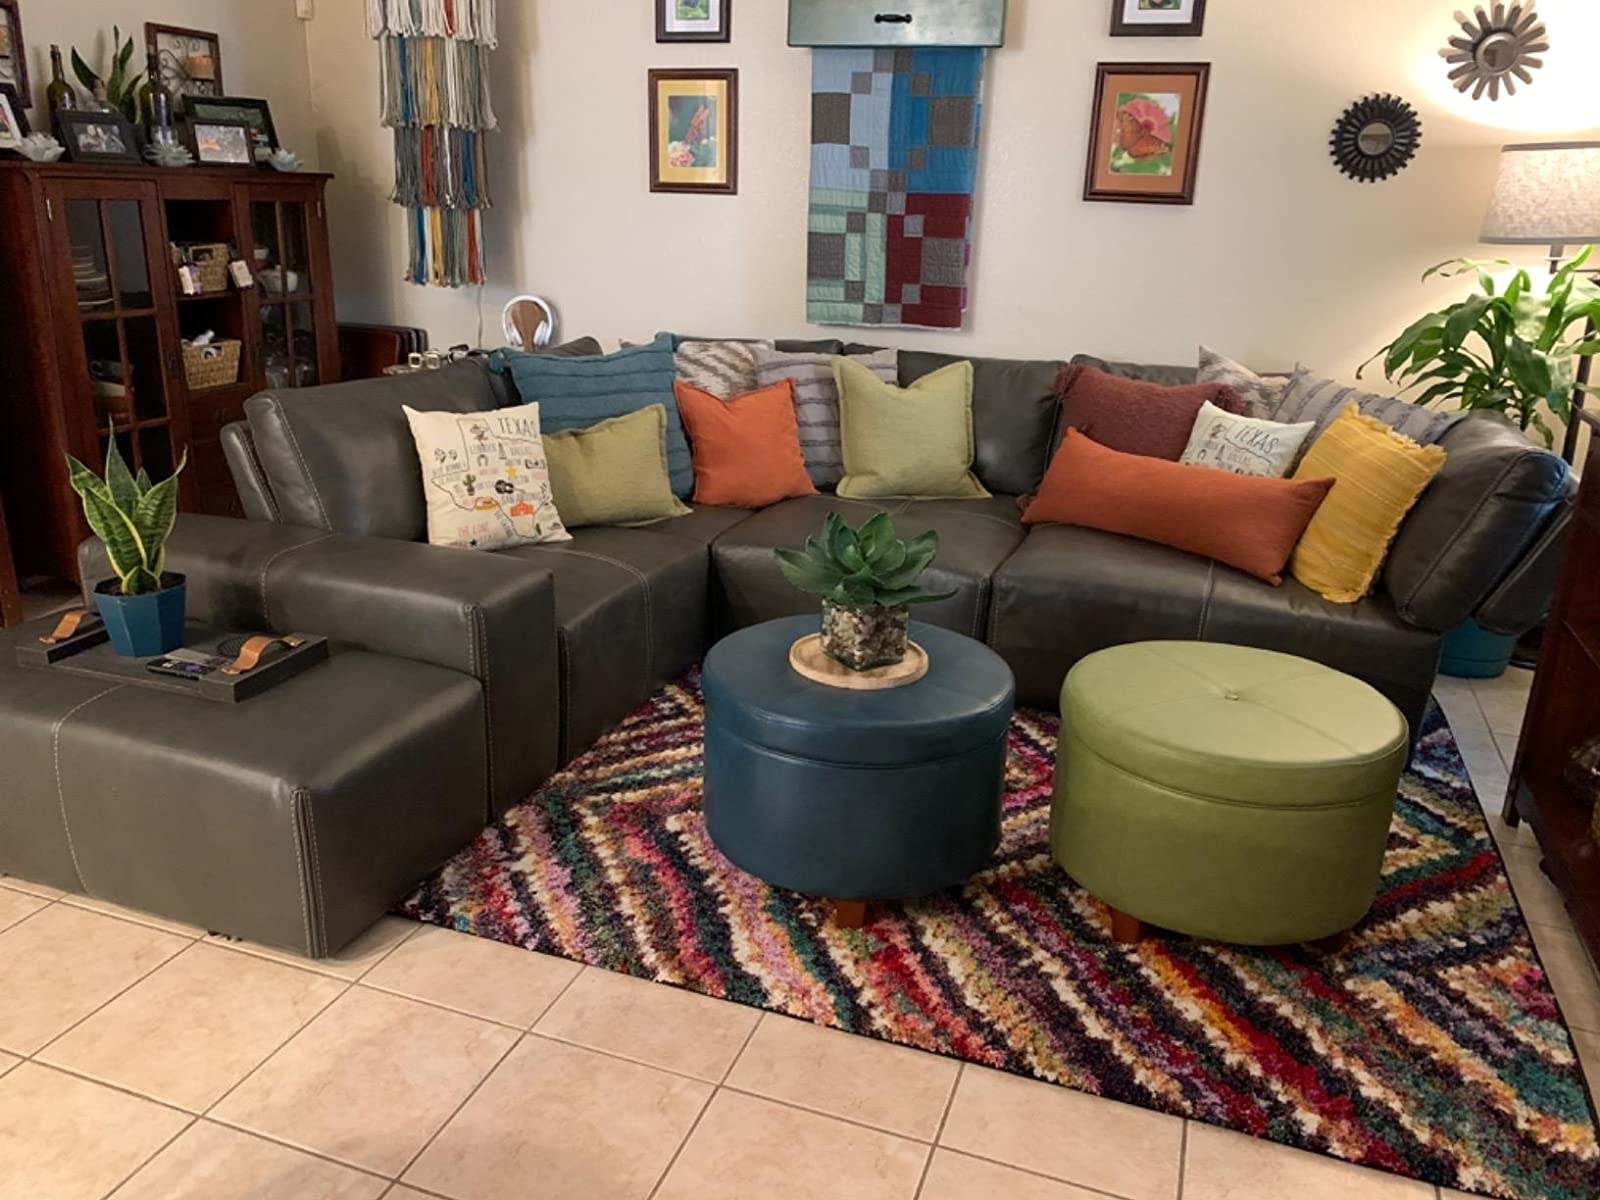 the teal ottoman in front of sectional couch on rug